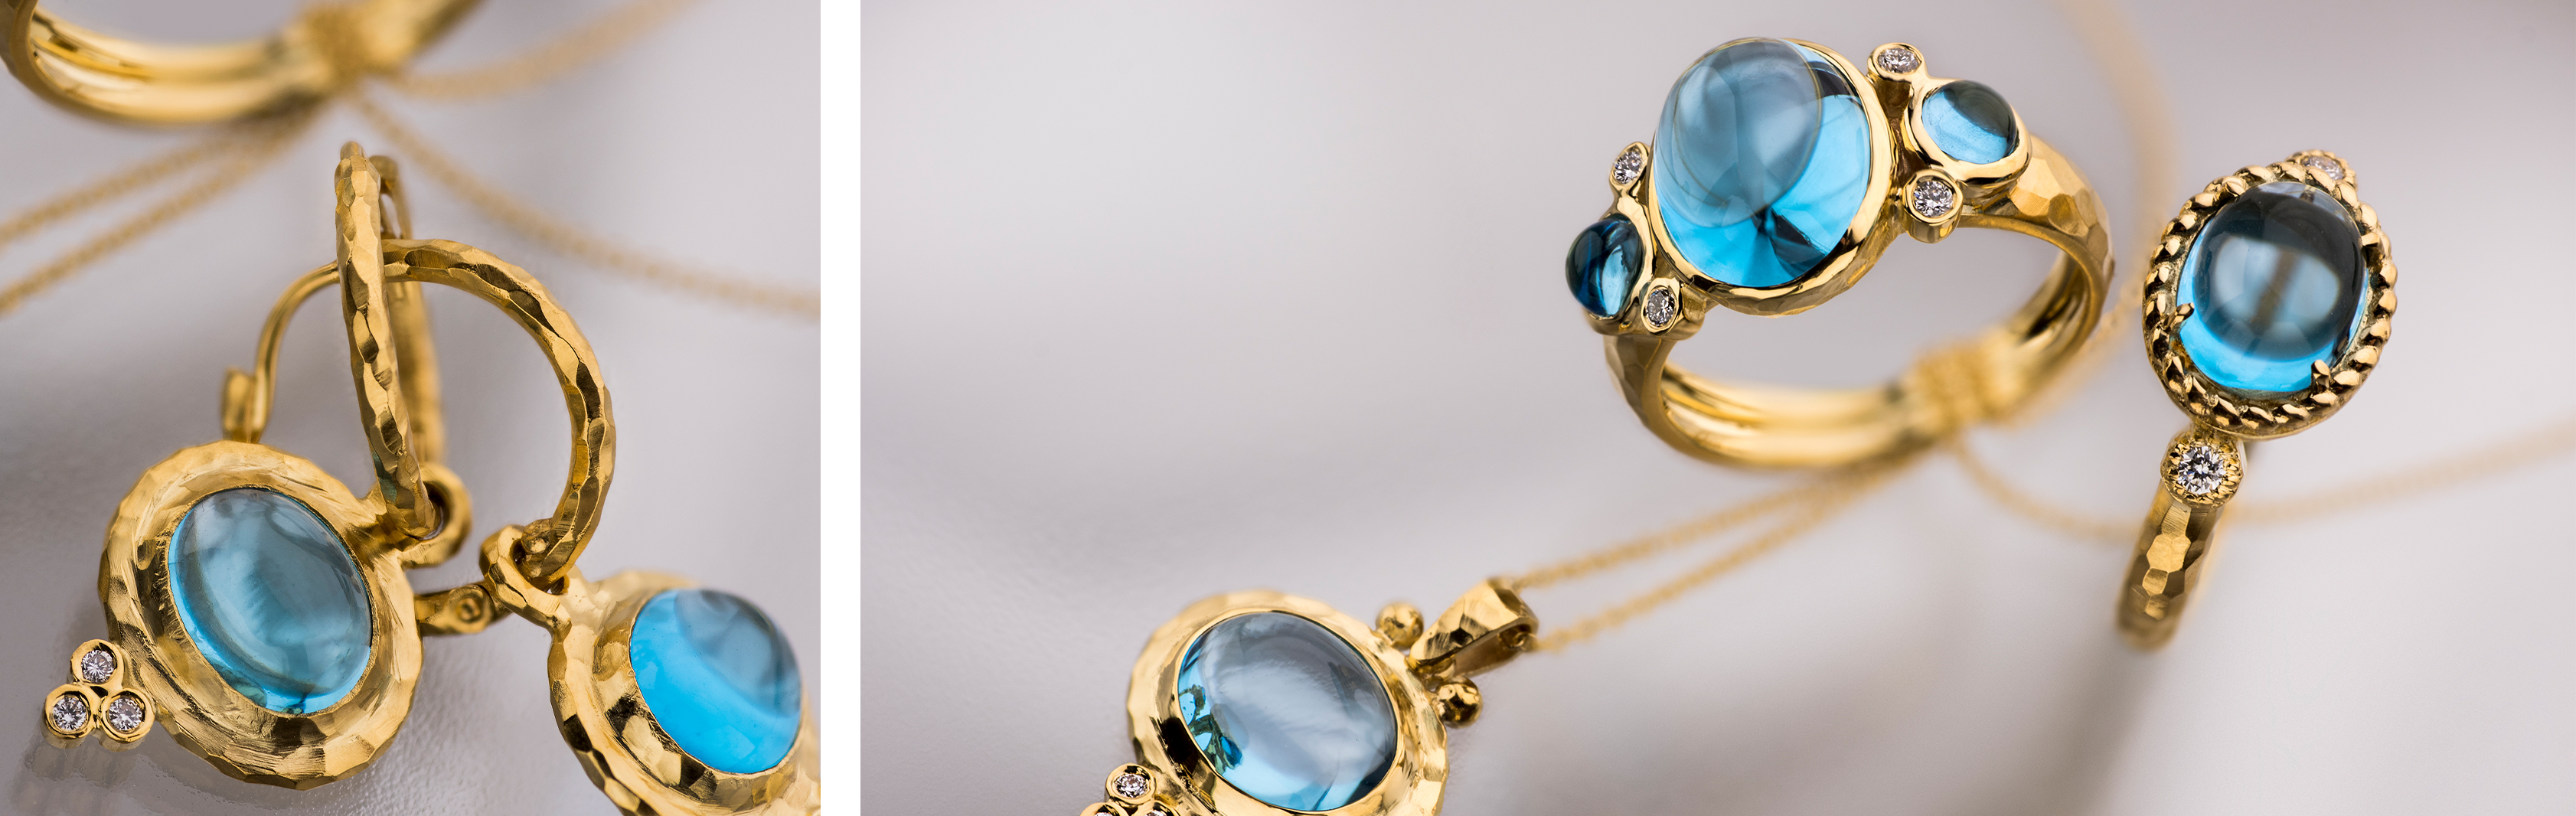 Mermaid Collection | 14K Gold Jewelry with Blue Topaz and Diamonds